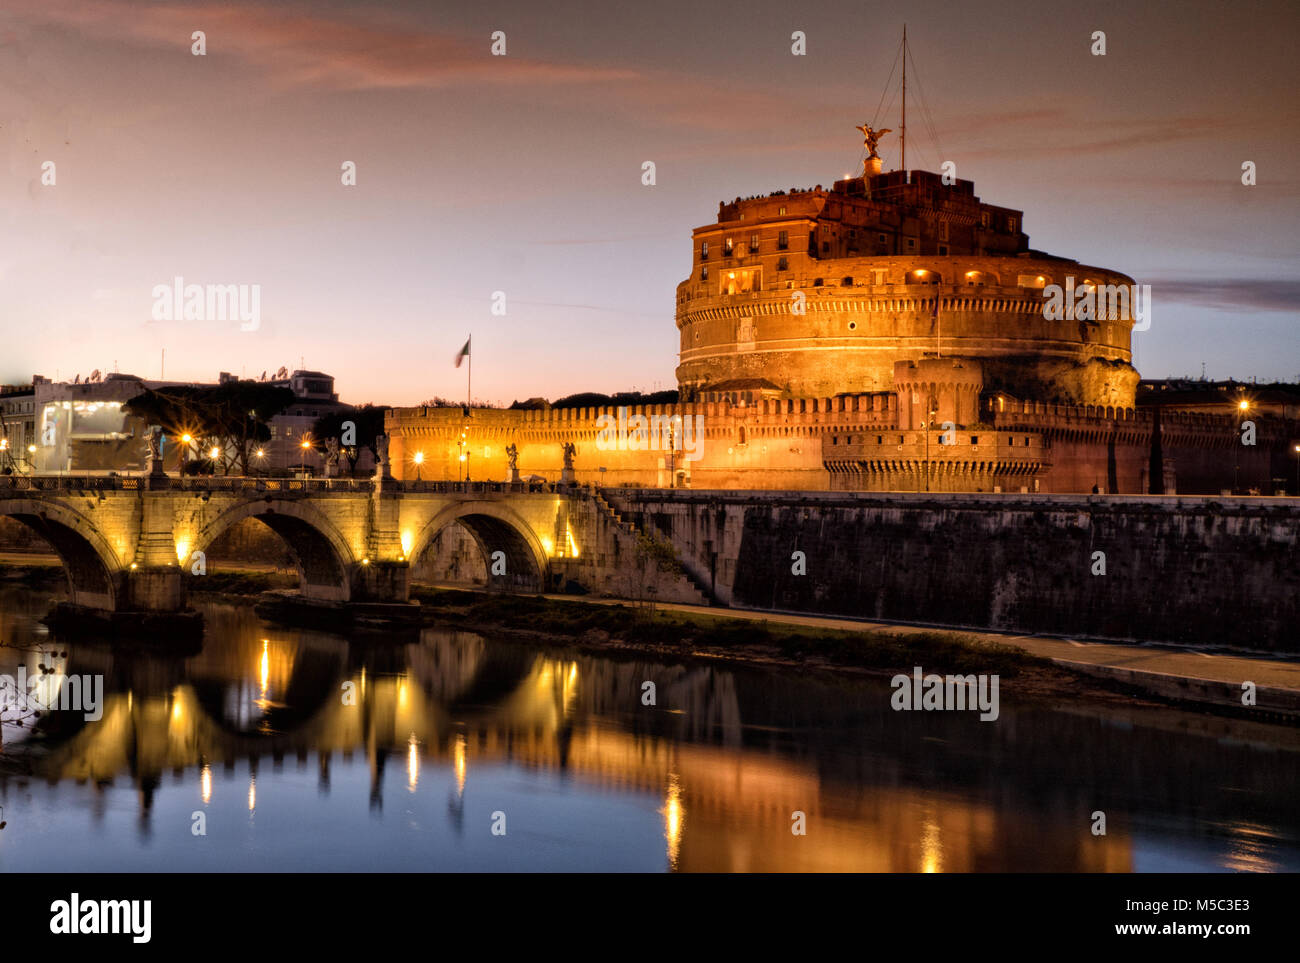 Sant' Angelo Castle and Tiber River in Rome, Italy by night Stock Photo